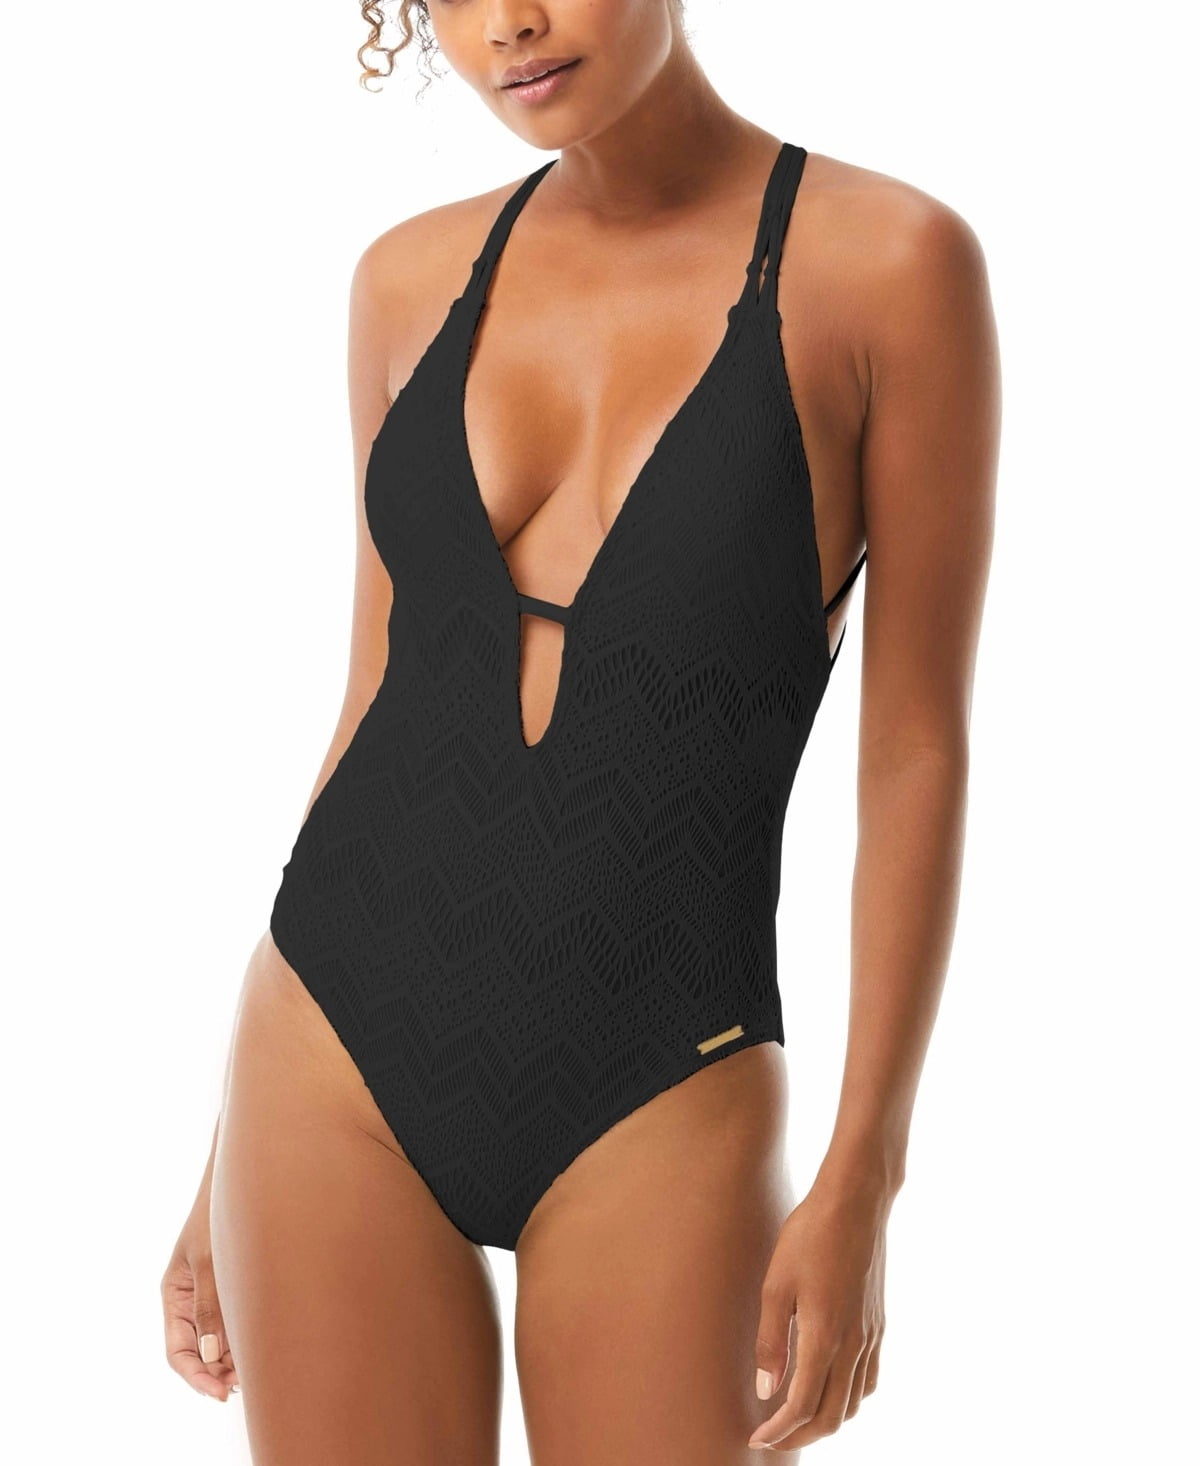 Vince Camuto Women's Black Two Piece Swimsuits